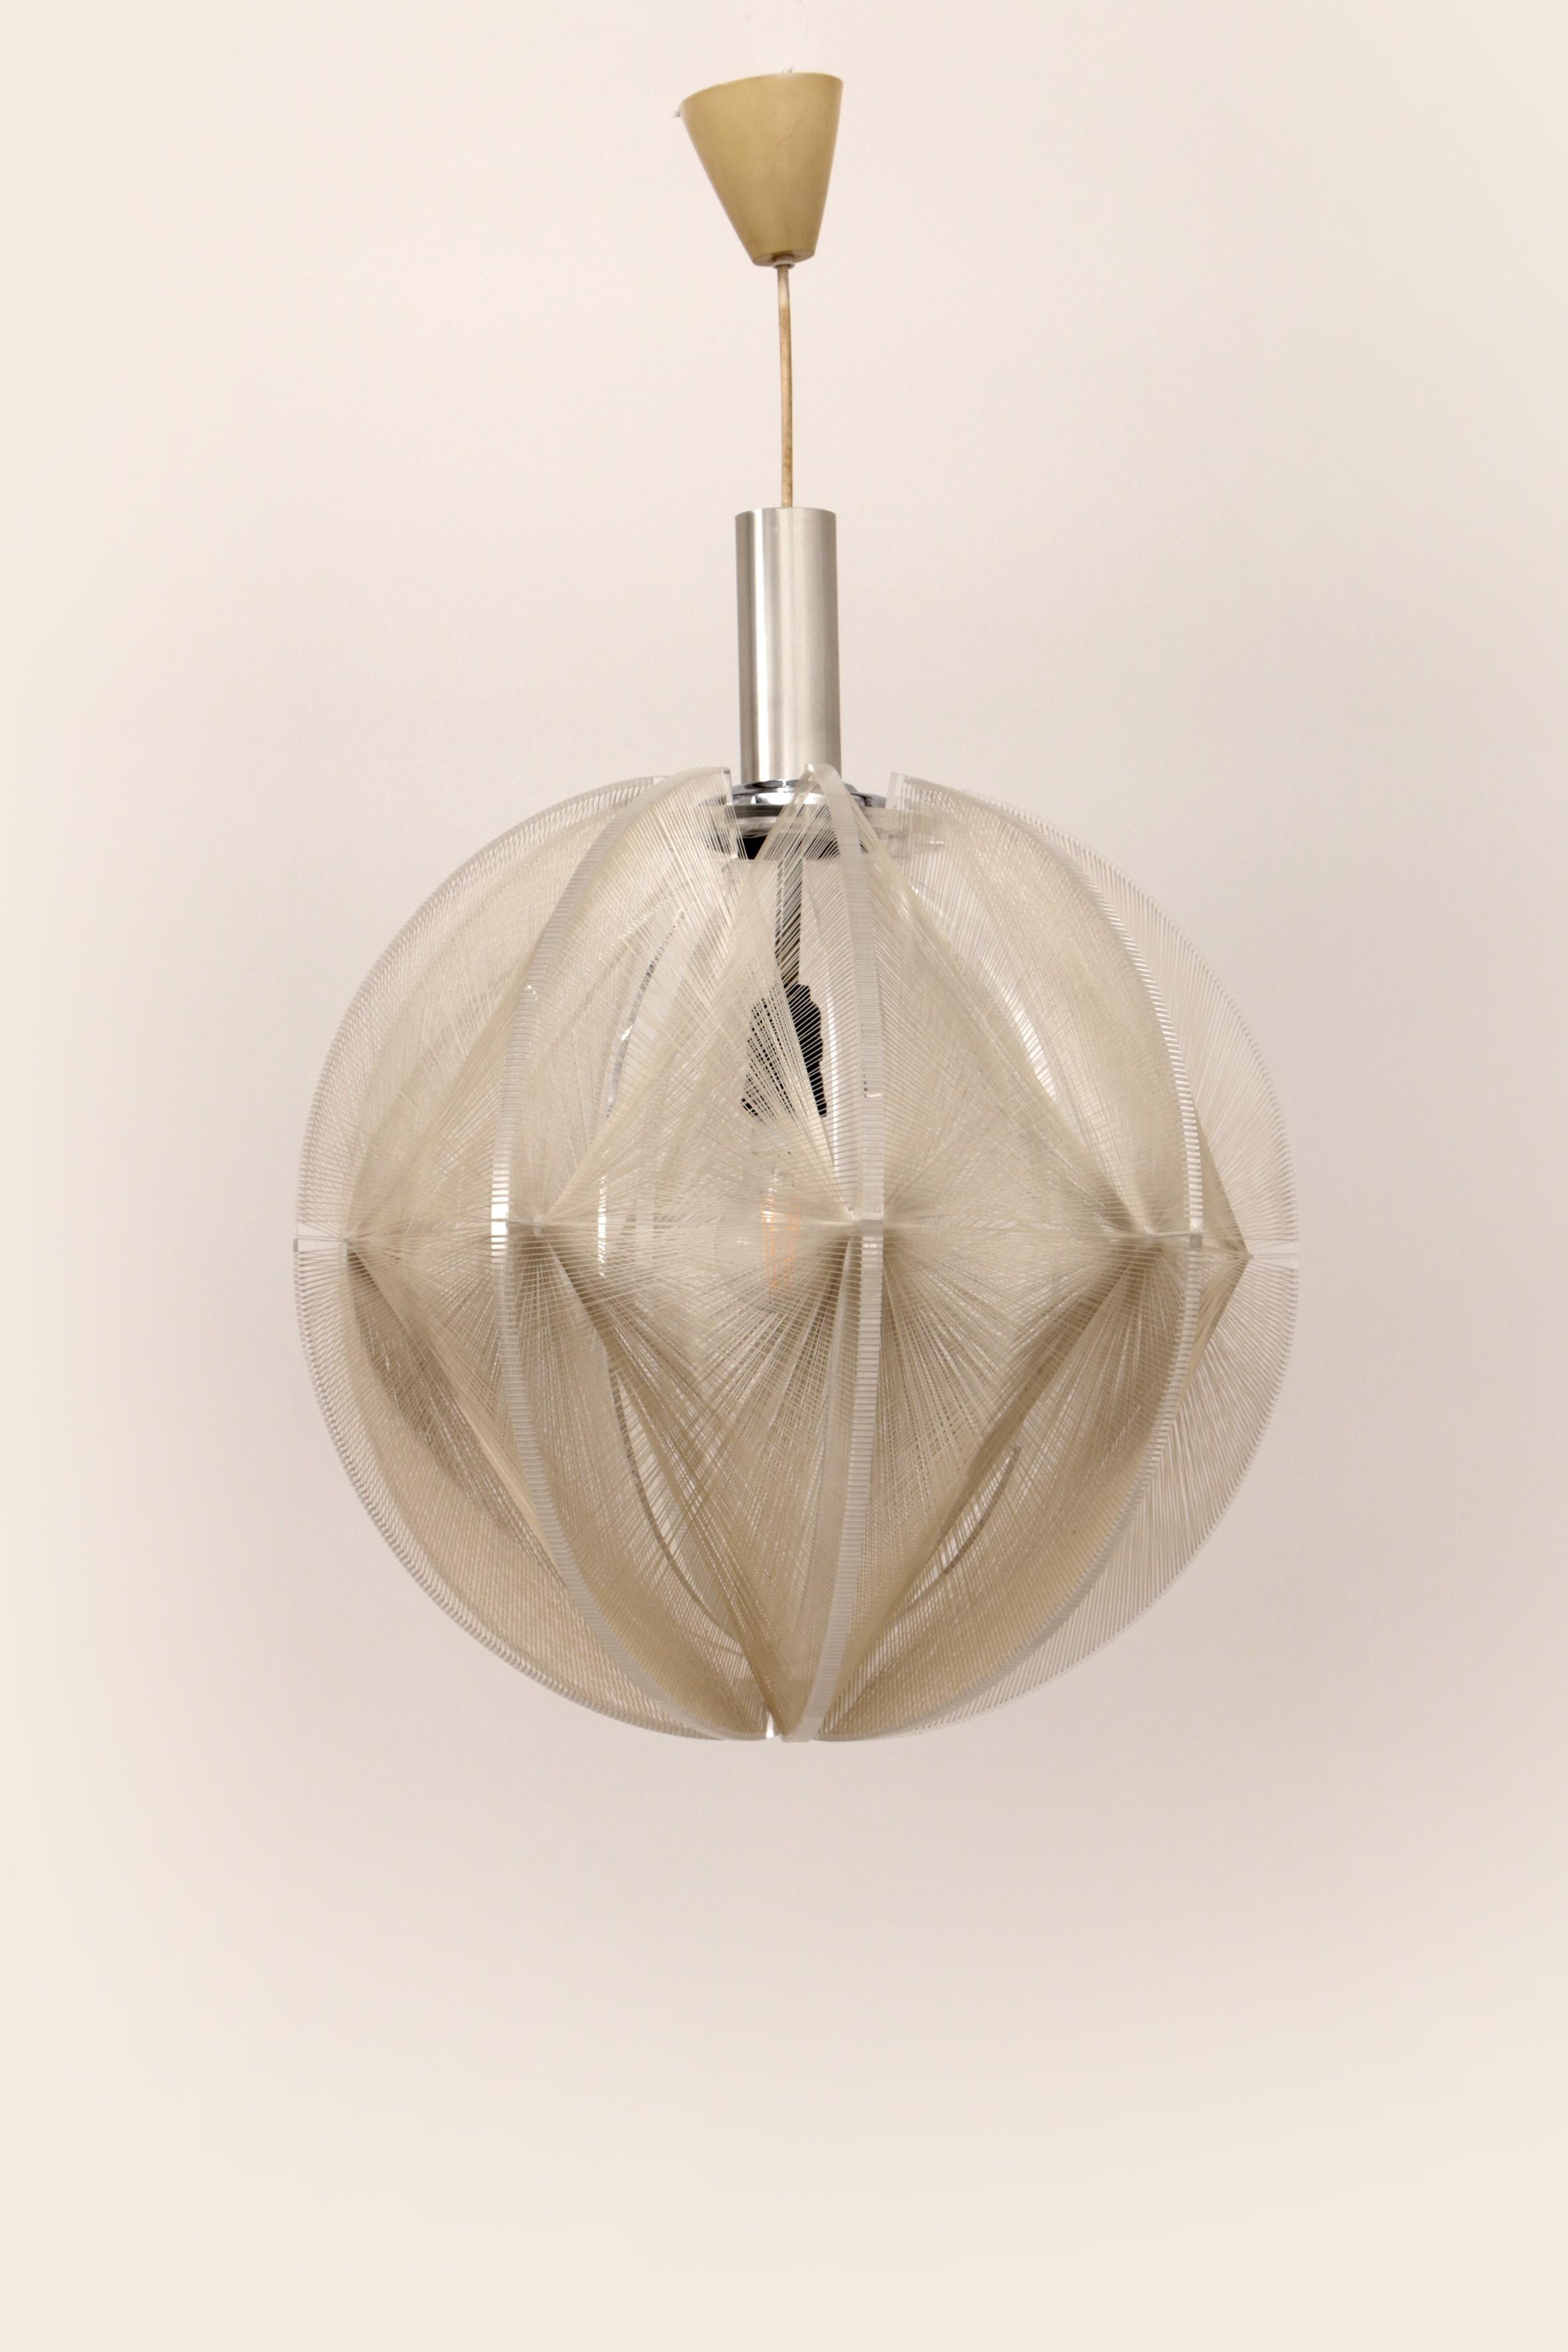 A beautiful pendant lamp from the 1960s, designed for Sompex by the French designer Paul Secon.

Made in Germany.

This lamp is also called Swag lamp. Material: perspex lamp in combination with nylon filament threads. Very unique in these